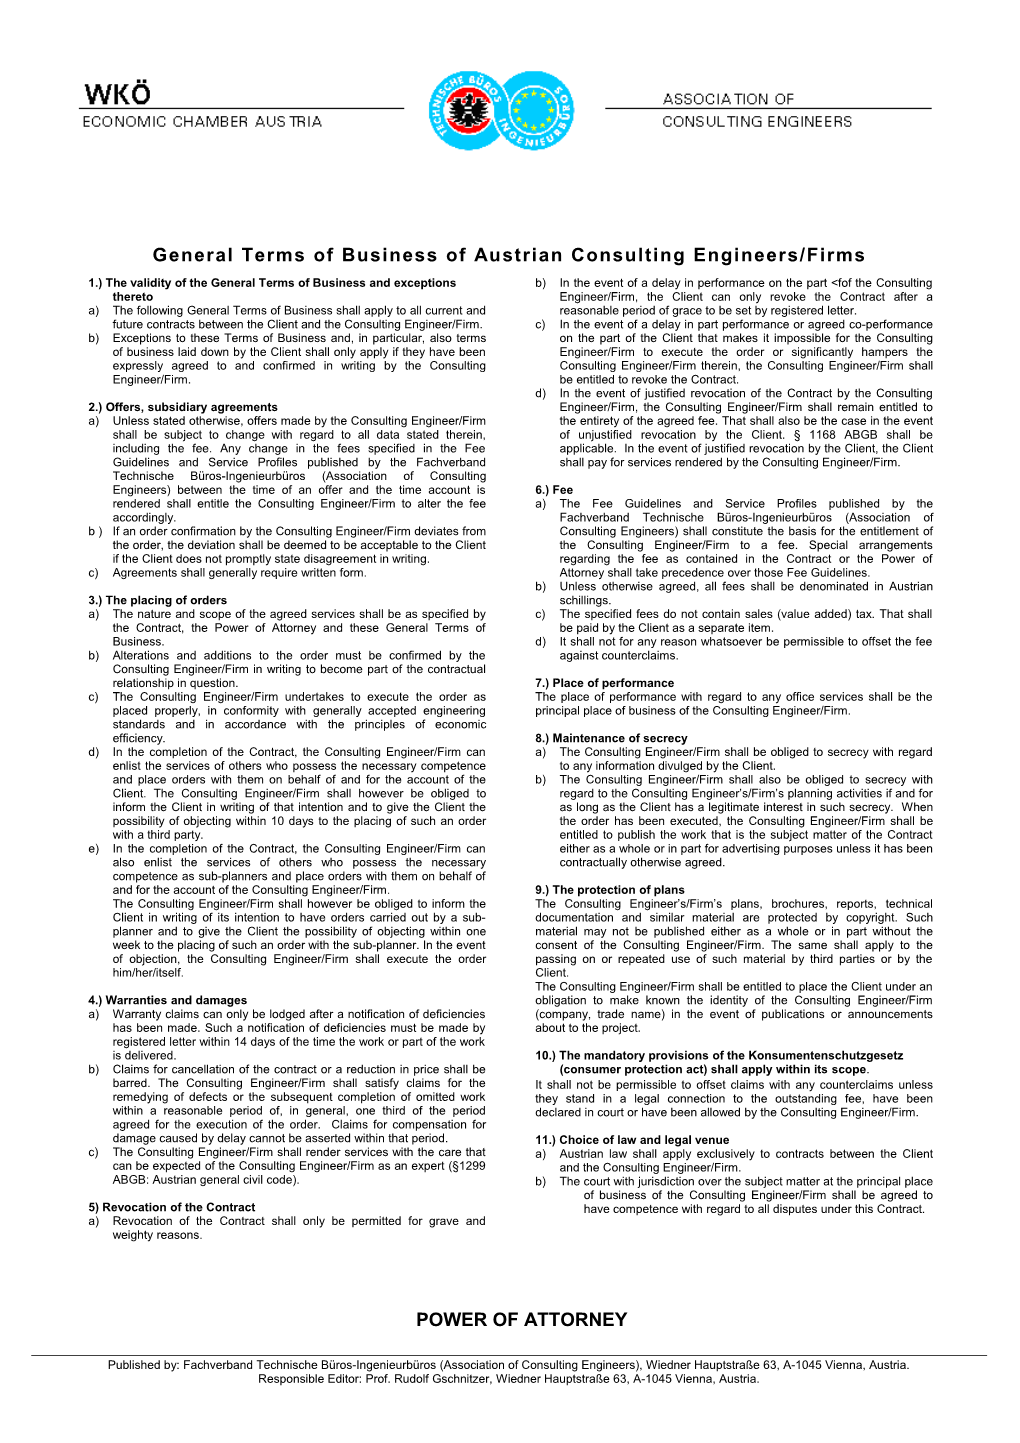 General Terms of Business of Austrian Consulting Engineers/Firms